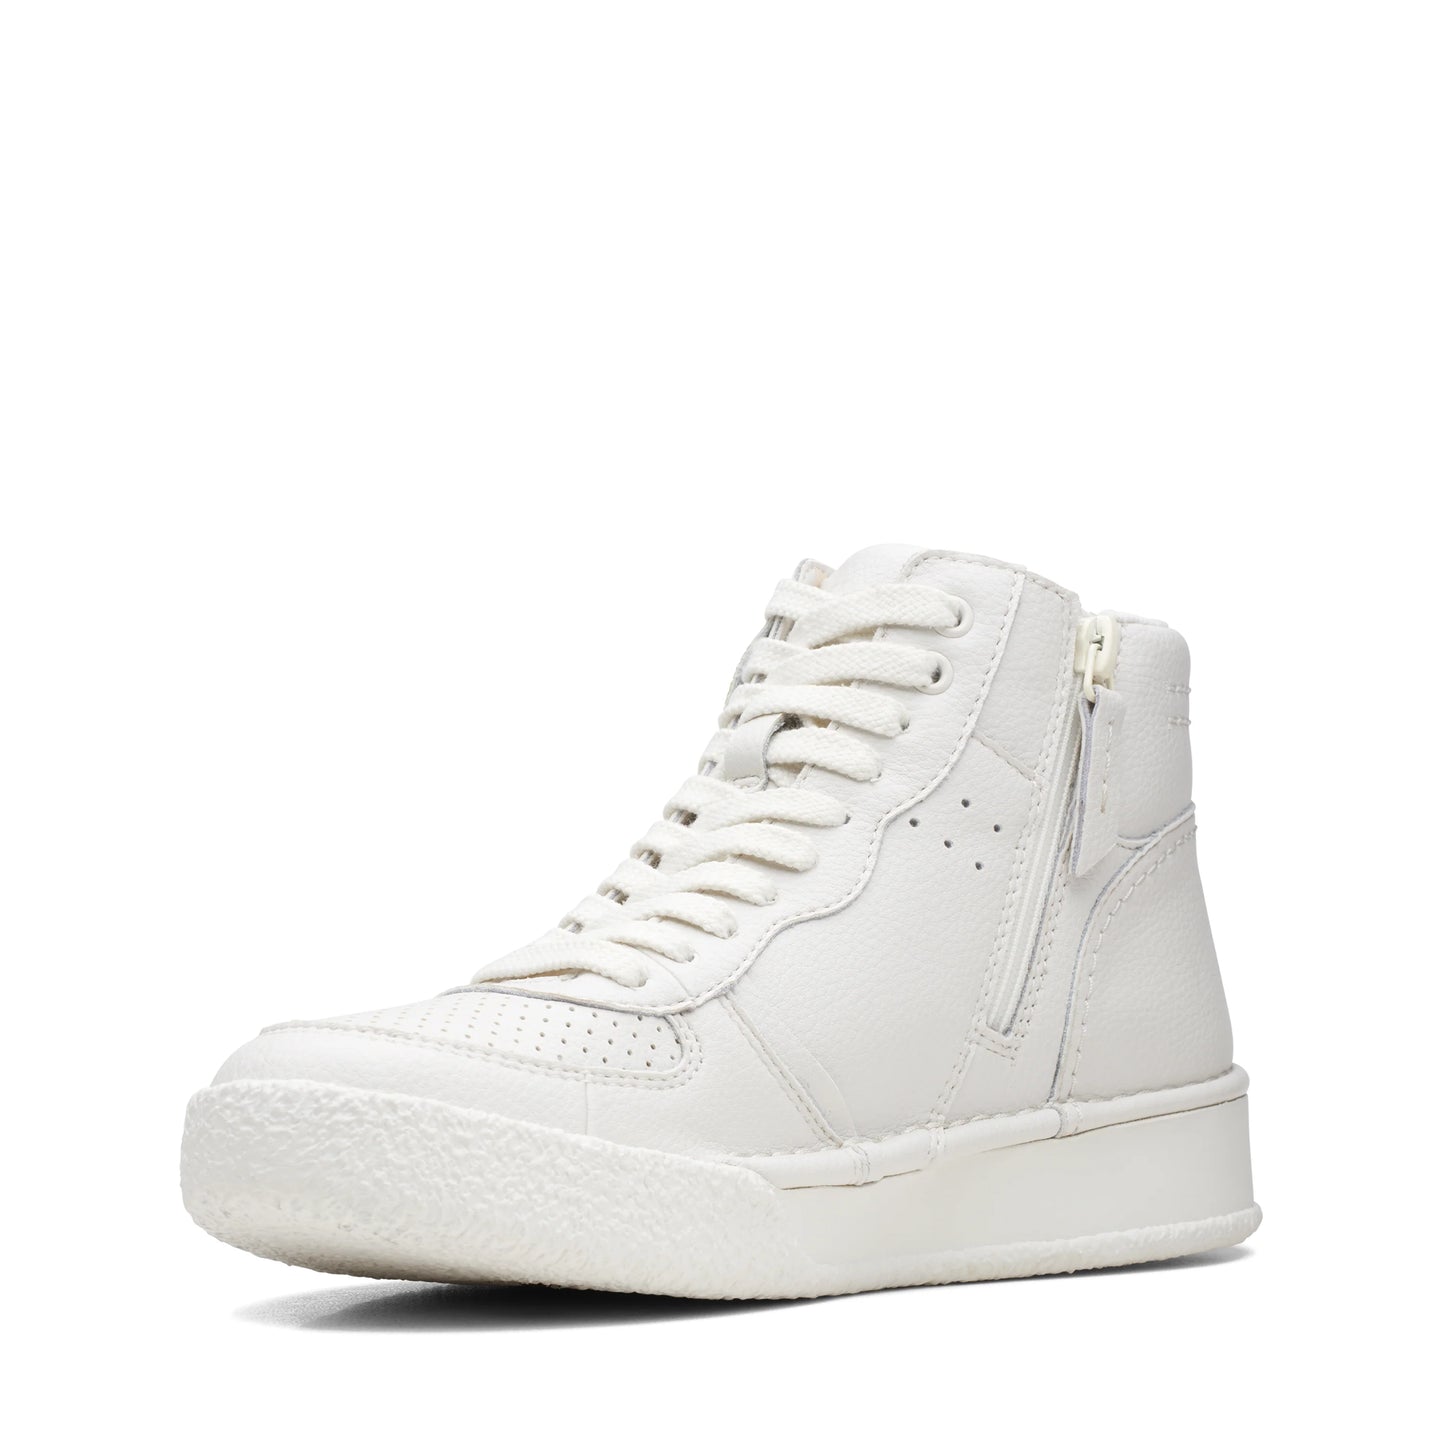 CLARKS | BOTAS MUJER | CRAFTCUP MID WHITE LEATHER | BLANCO